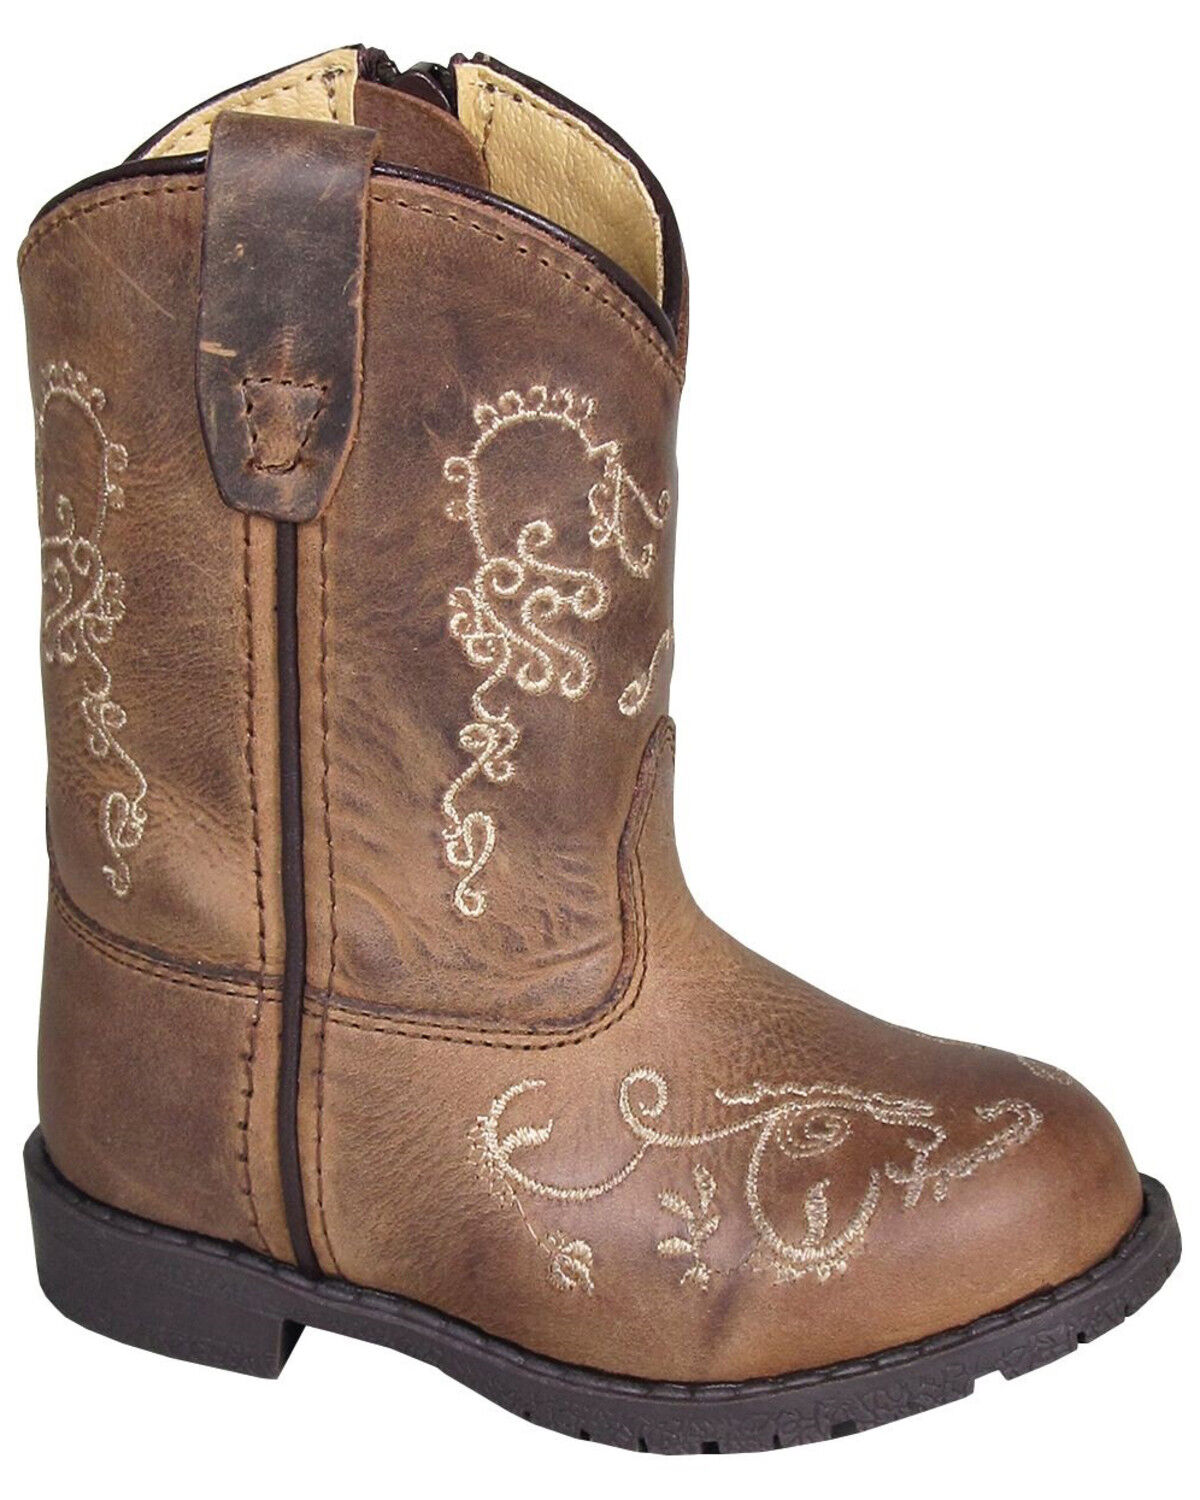 Smoky Mountain Youth Denver Distressed Brown Leather Cowboy Boots Black